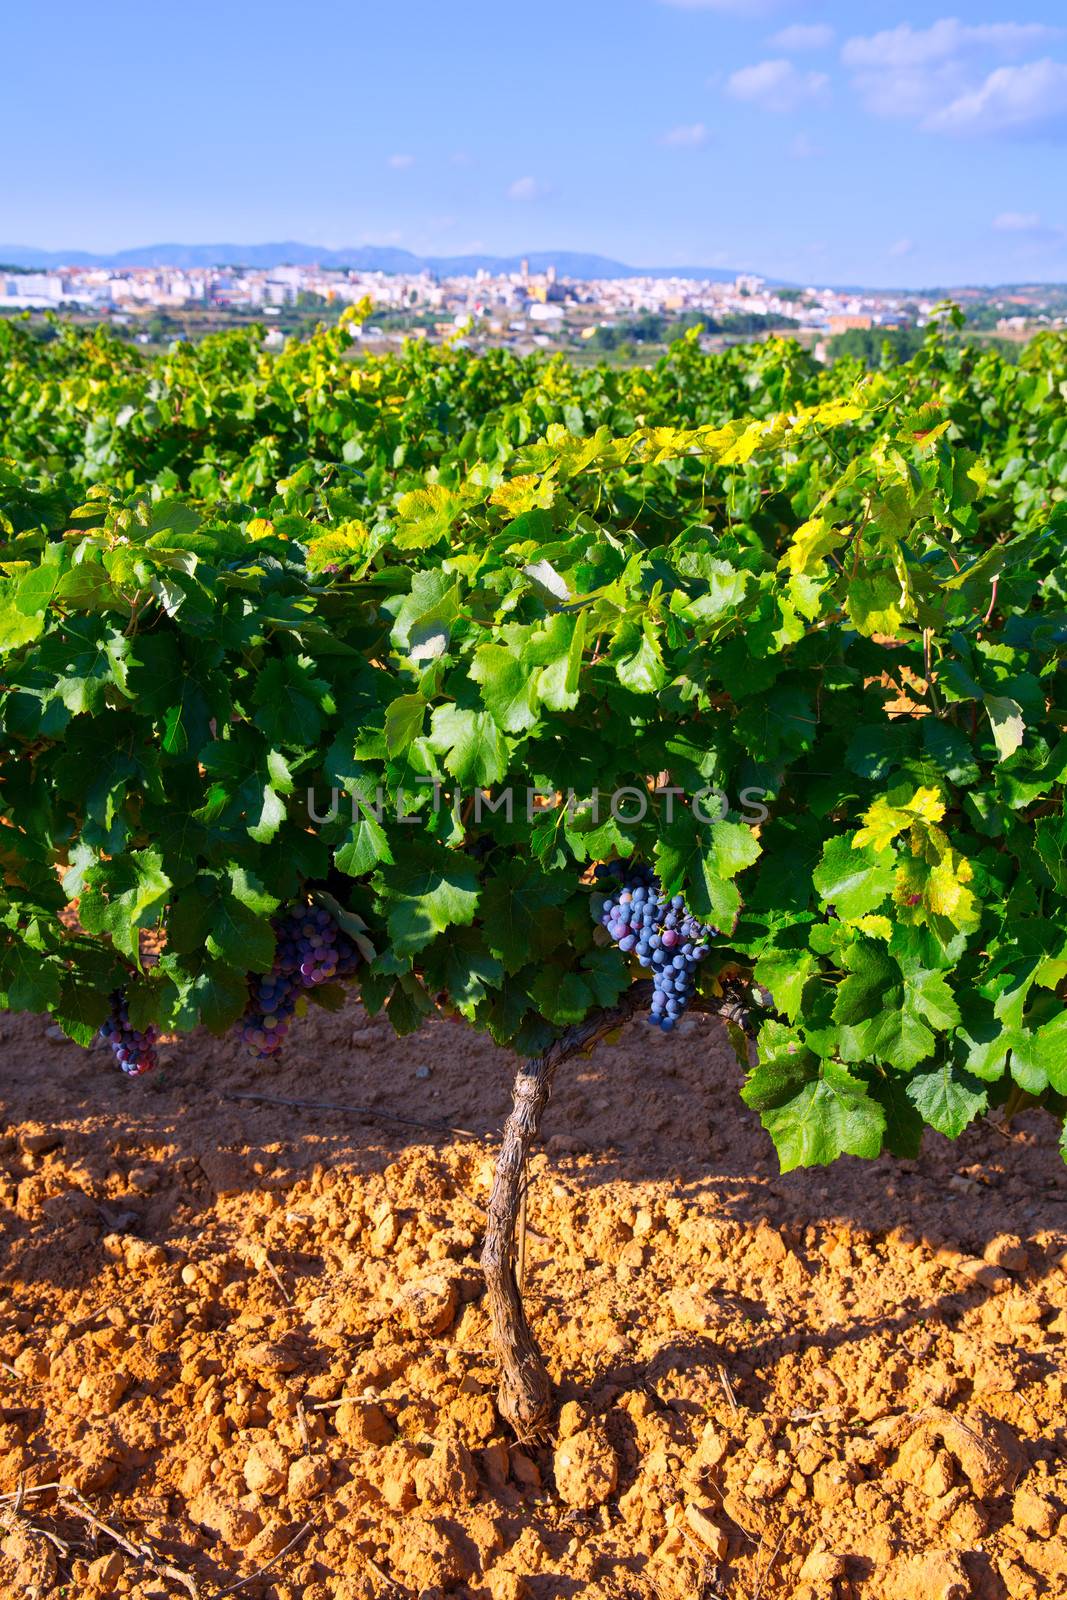 Requena in Valencia province a wine region of Spain from vineyard view